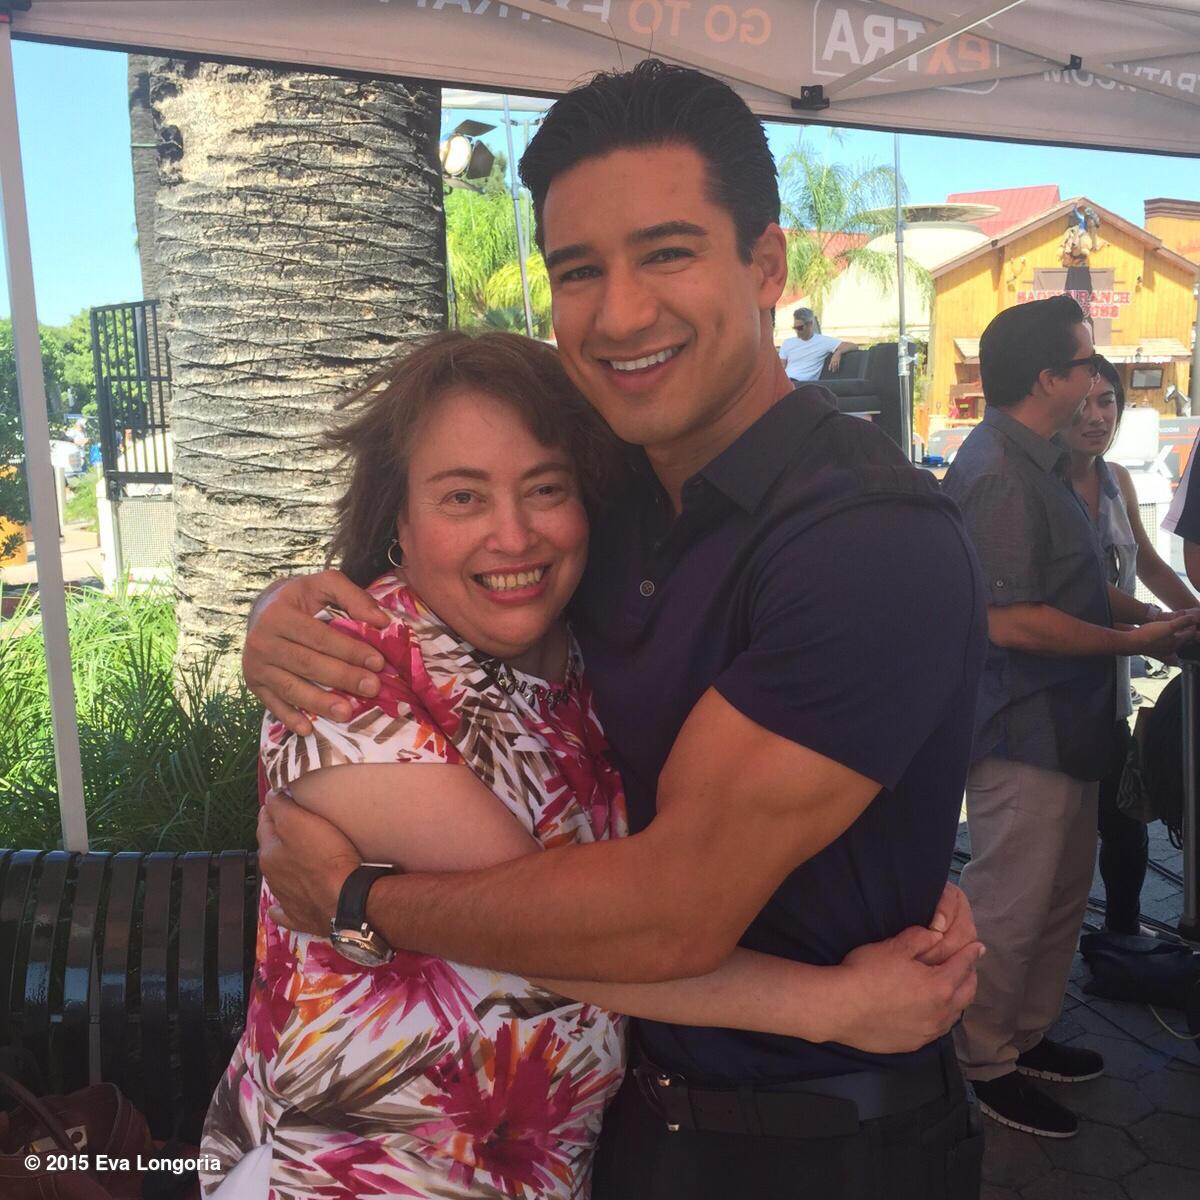 First the Pope and now @MarioLopezExtra !! She's in heaven already! Thx Mario! http://t.co/vMfVD6j7QW